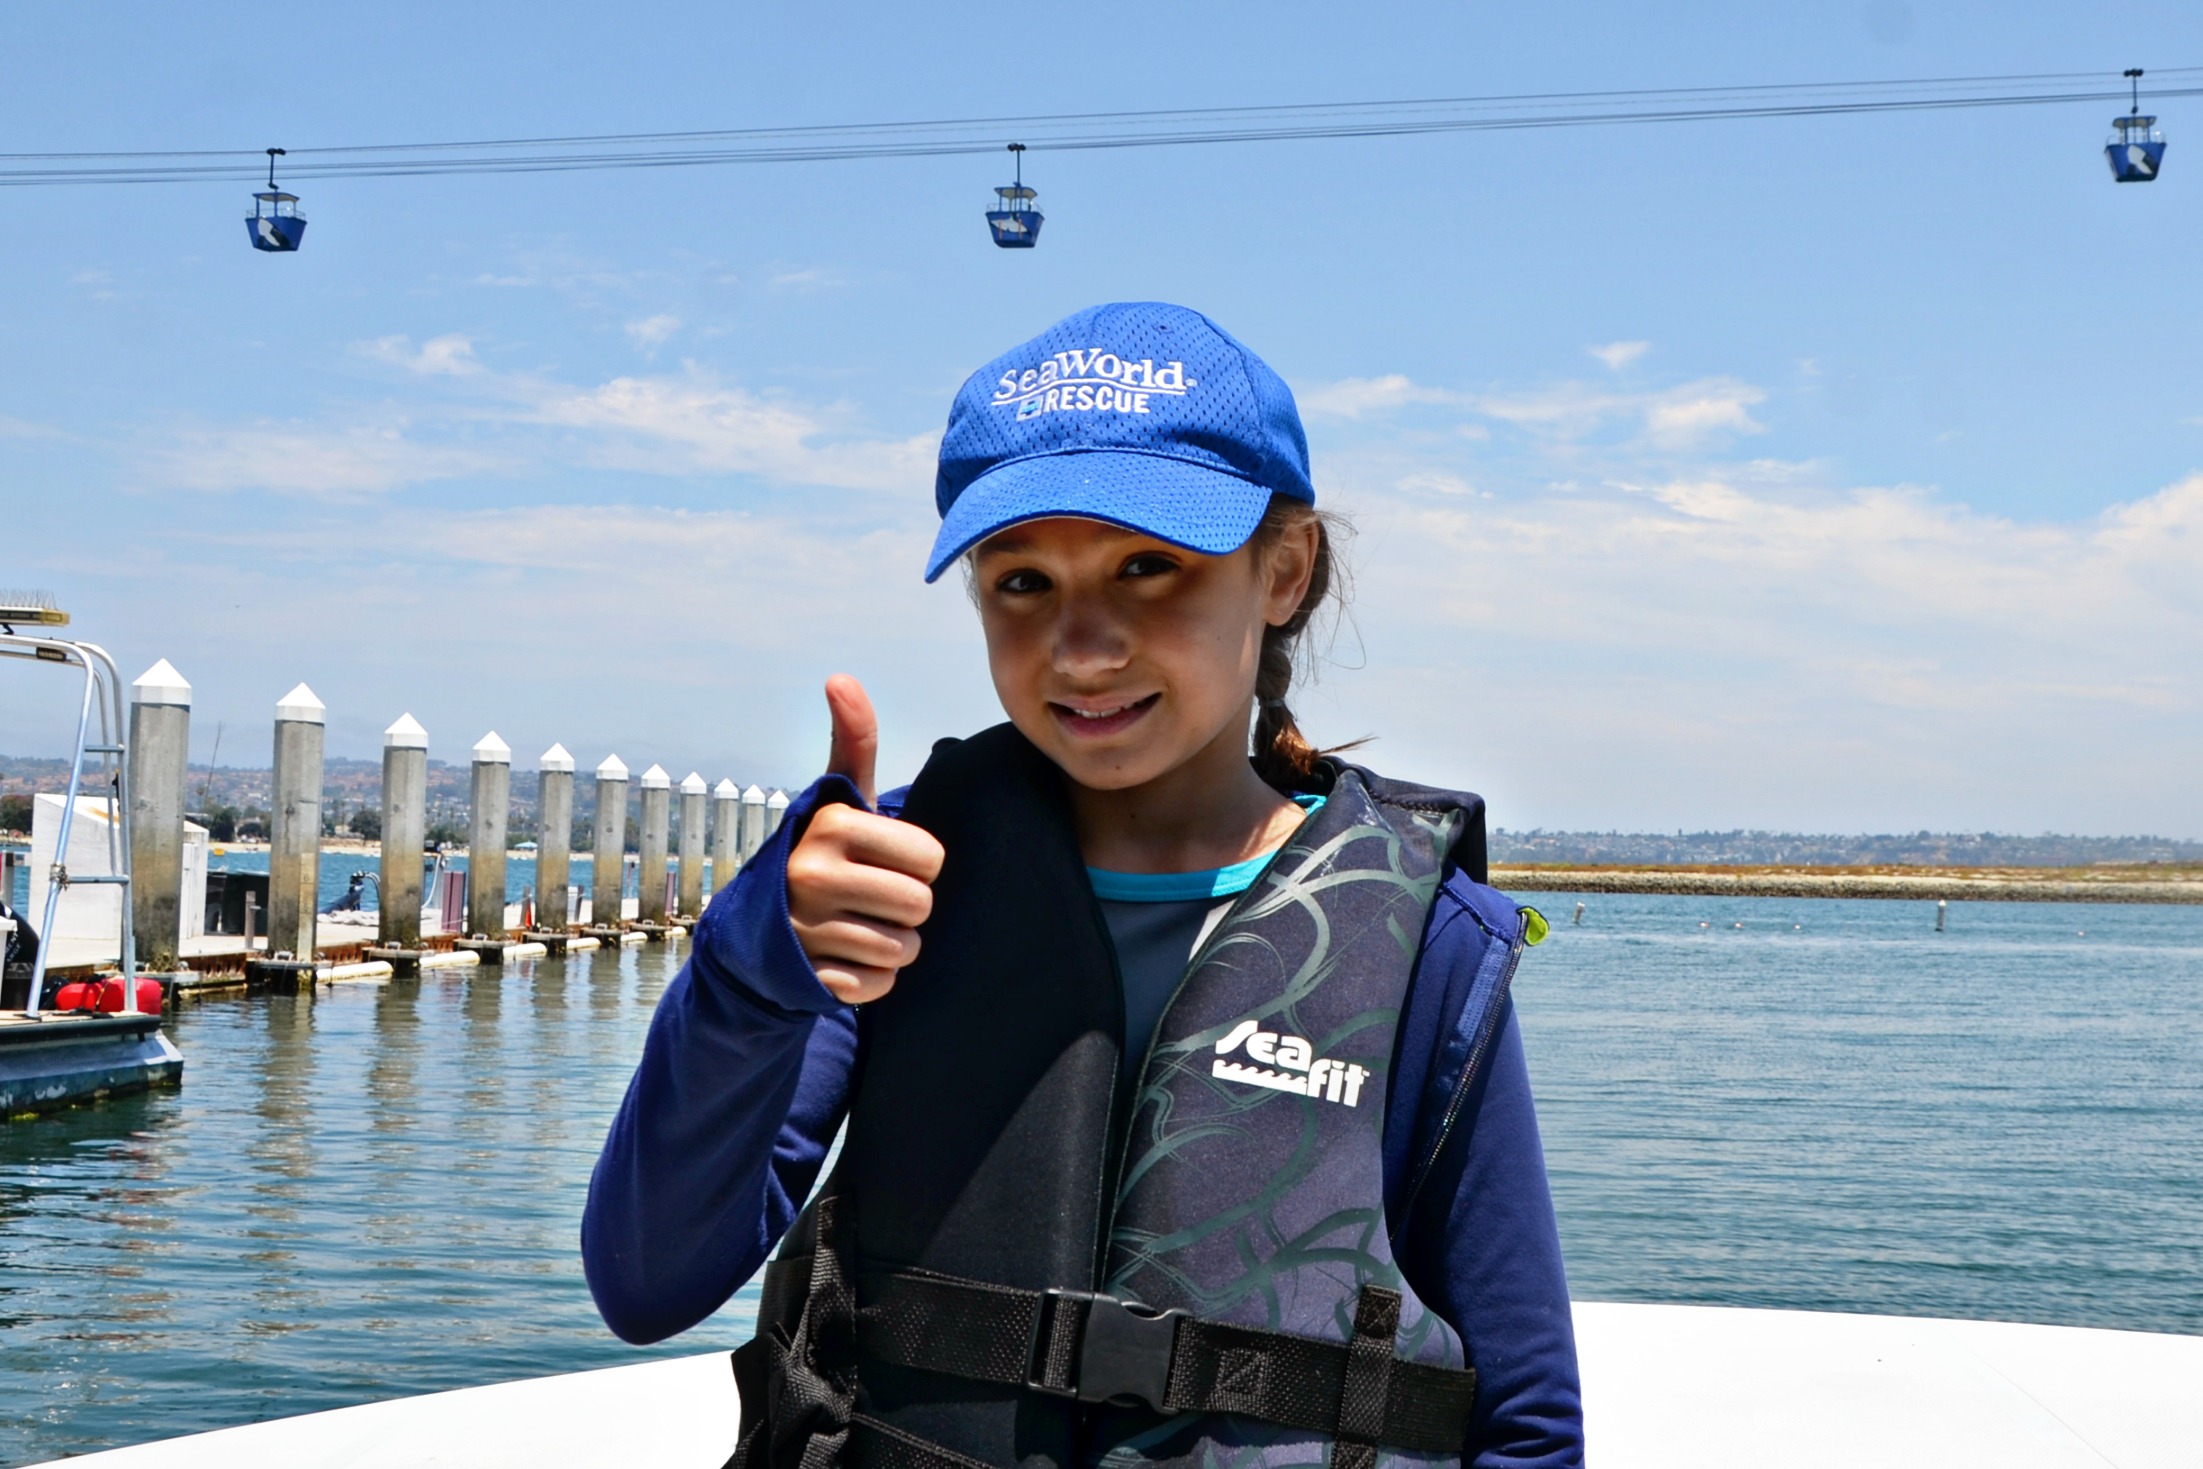 As the SeaWorld guest kid blogger, my daughter has had great learning opportunities. Our boat return experience on a SeaWorld animal return with sea lions and elephant seals was remarkable.